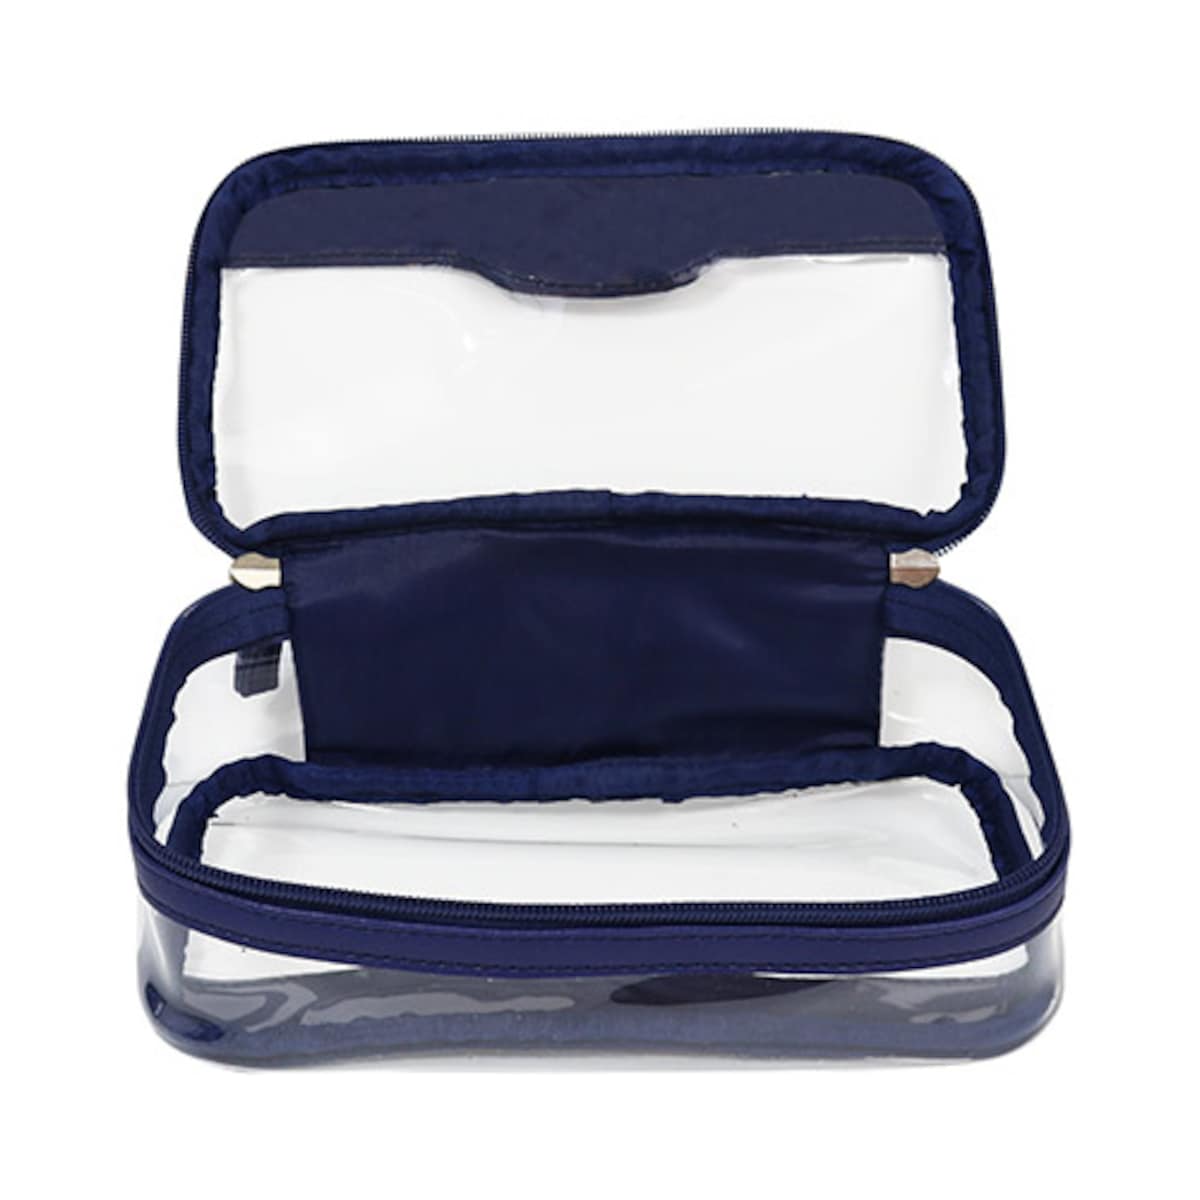 Wicked Sista Premium Clear Beauty Case Navy